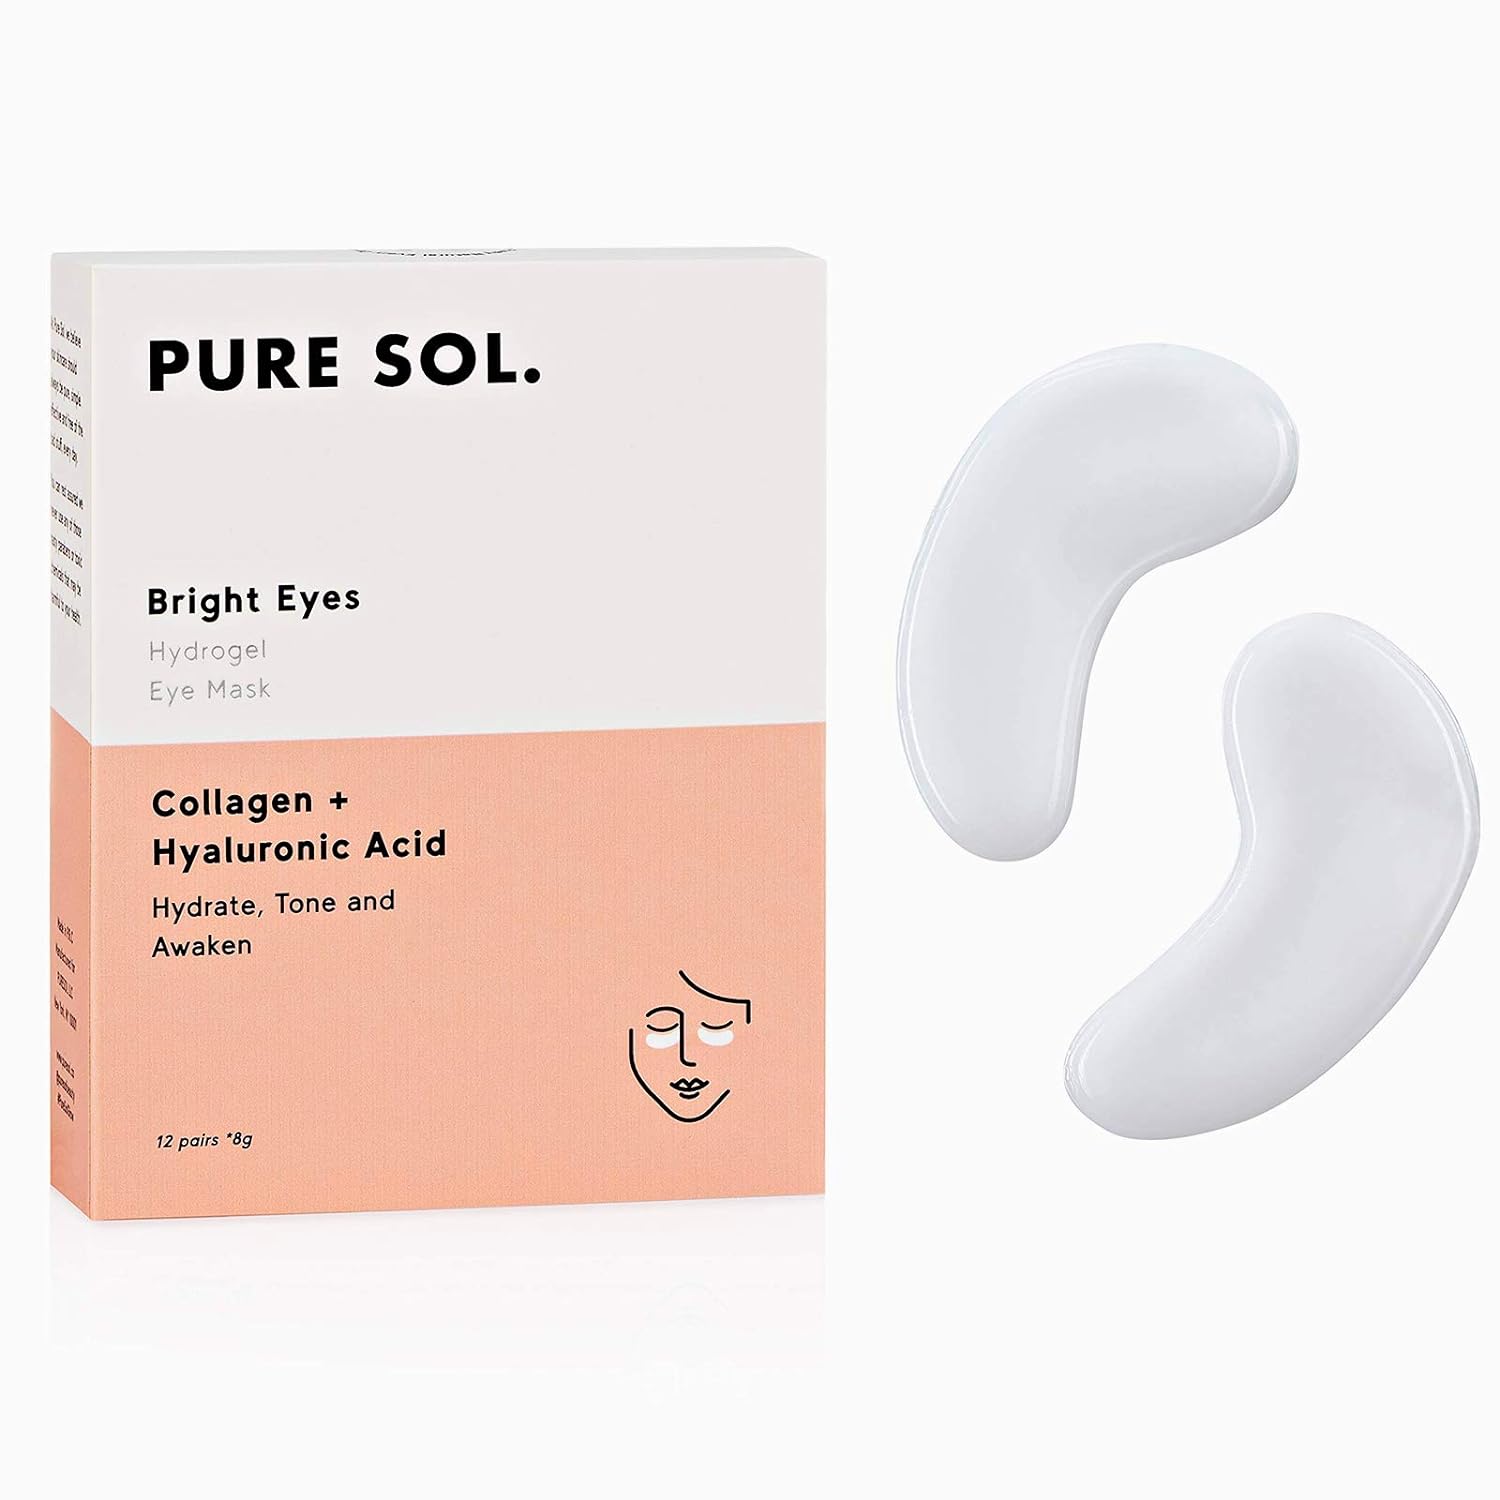 pureSOL PURE SOL. Hydrogel Collagen Eye Mask with Hyaluronic Acid, Grape Seed Extract, Hydrate, Tone and Awaken (12 pairs)